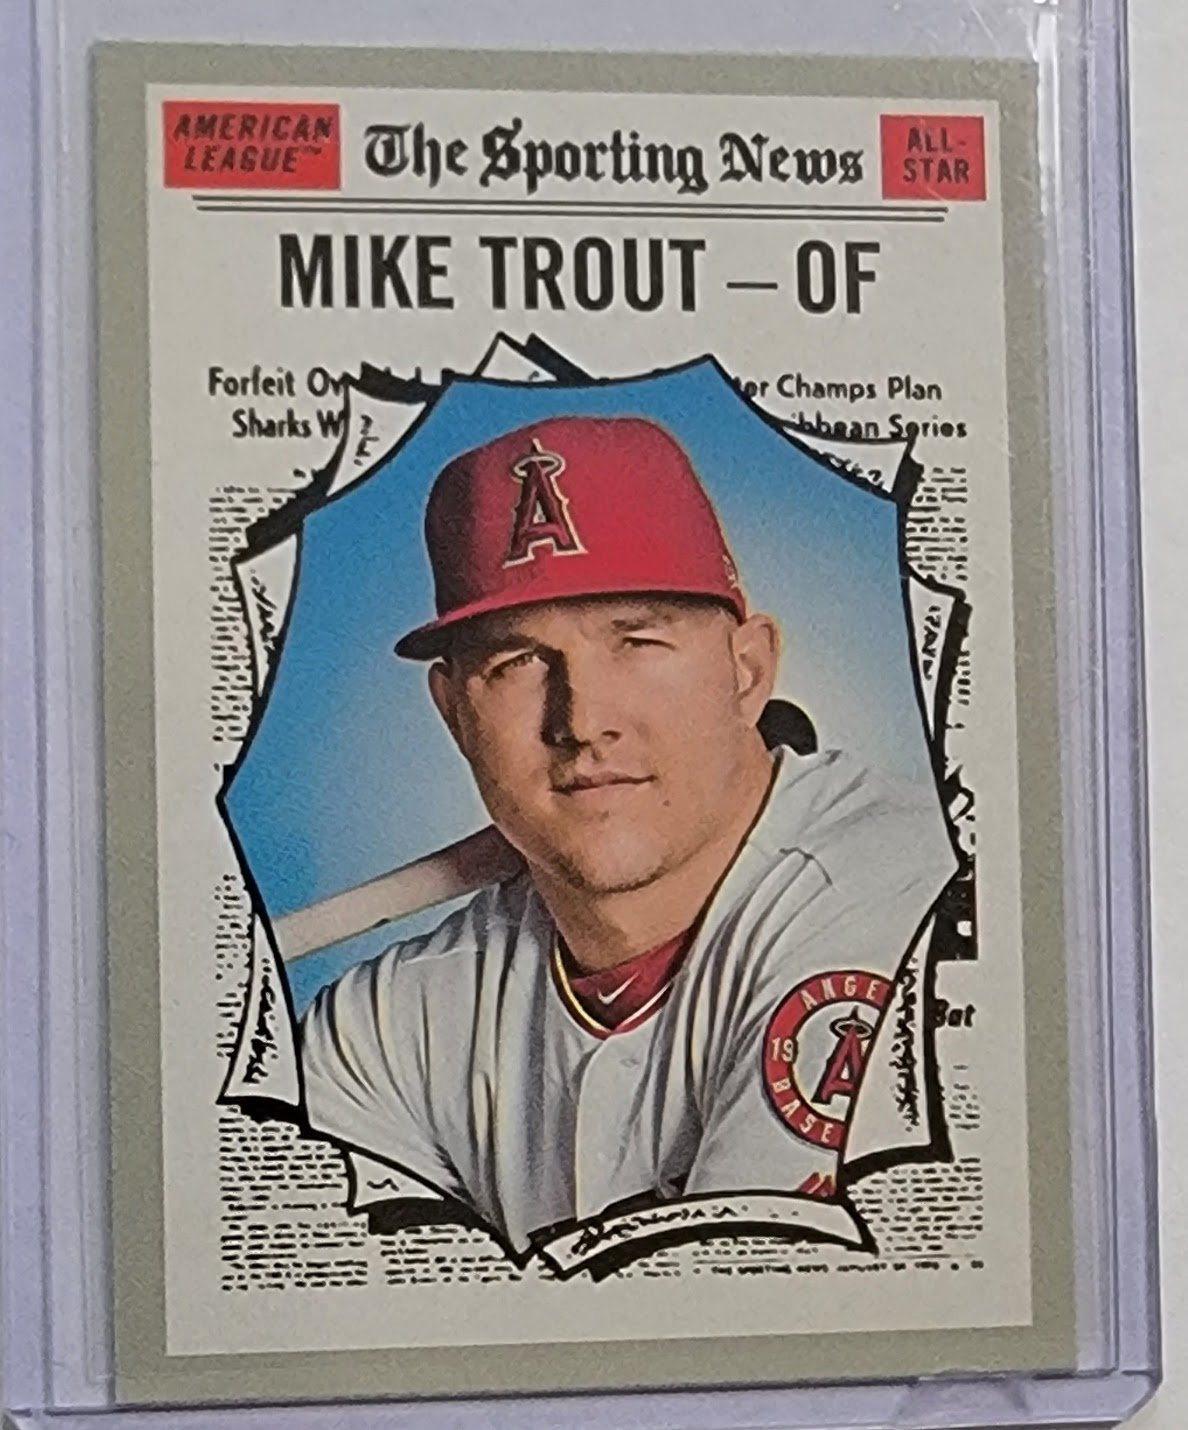 2019 Topps Heritage Mike Trout Sporting News Baseball Card TPTV simple Xclusive Collectibles   